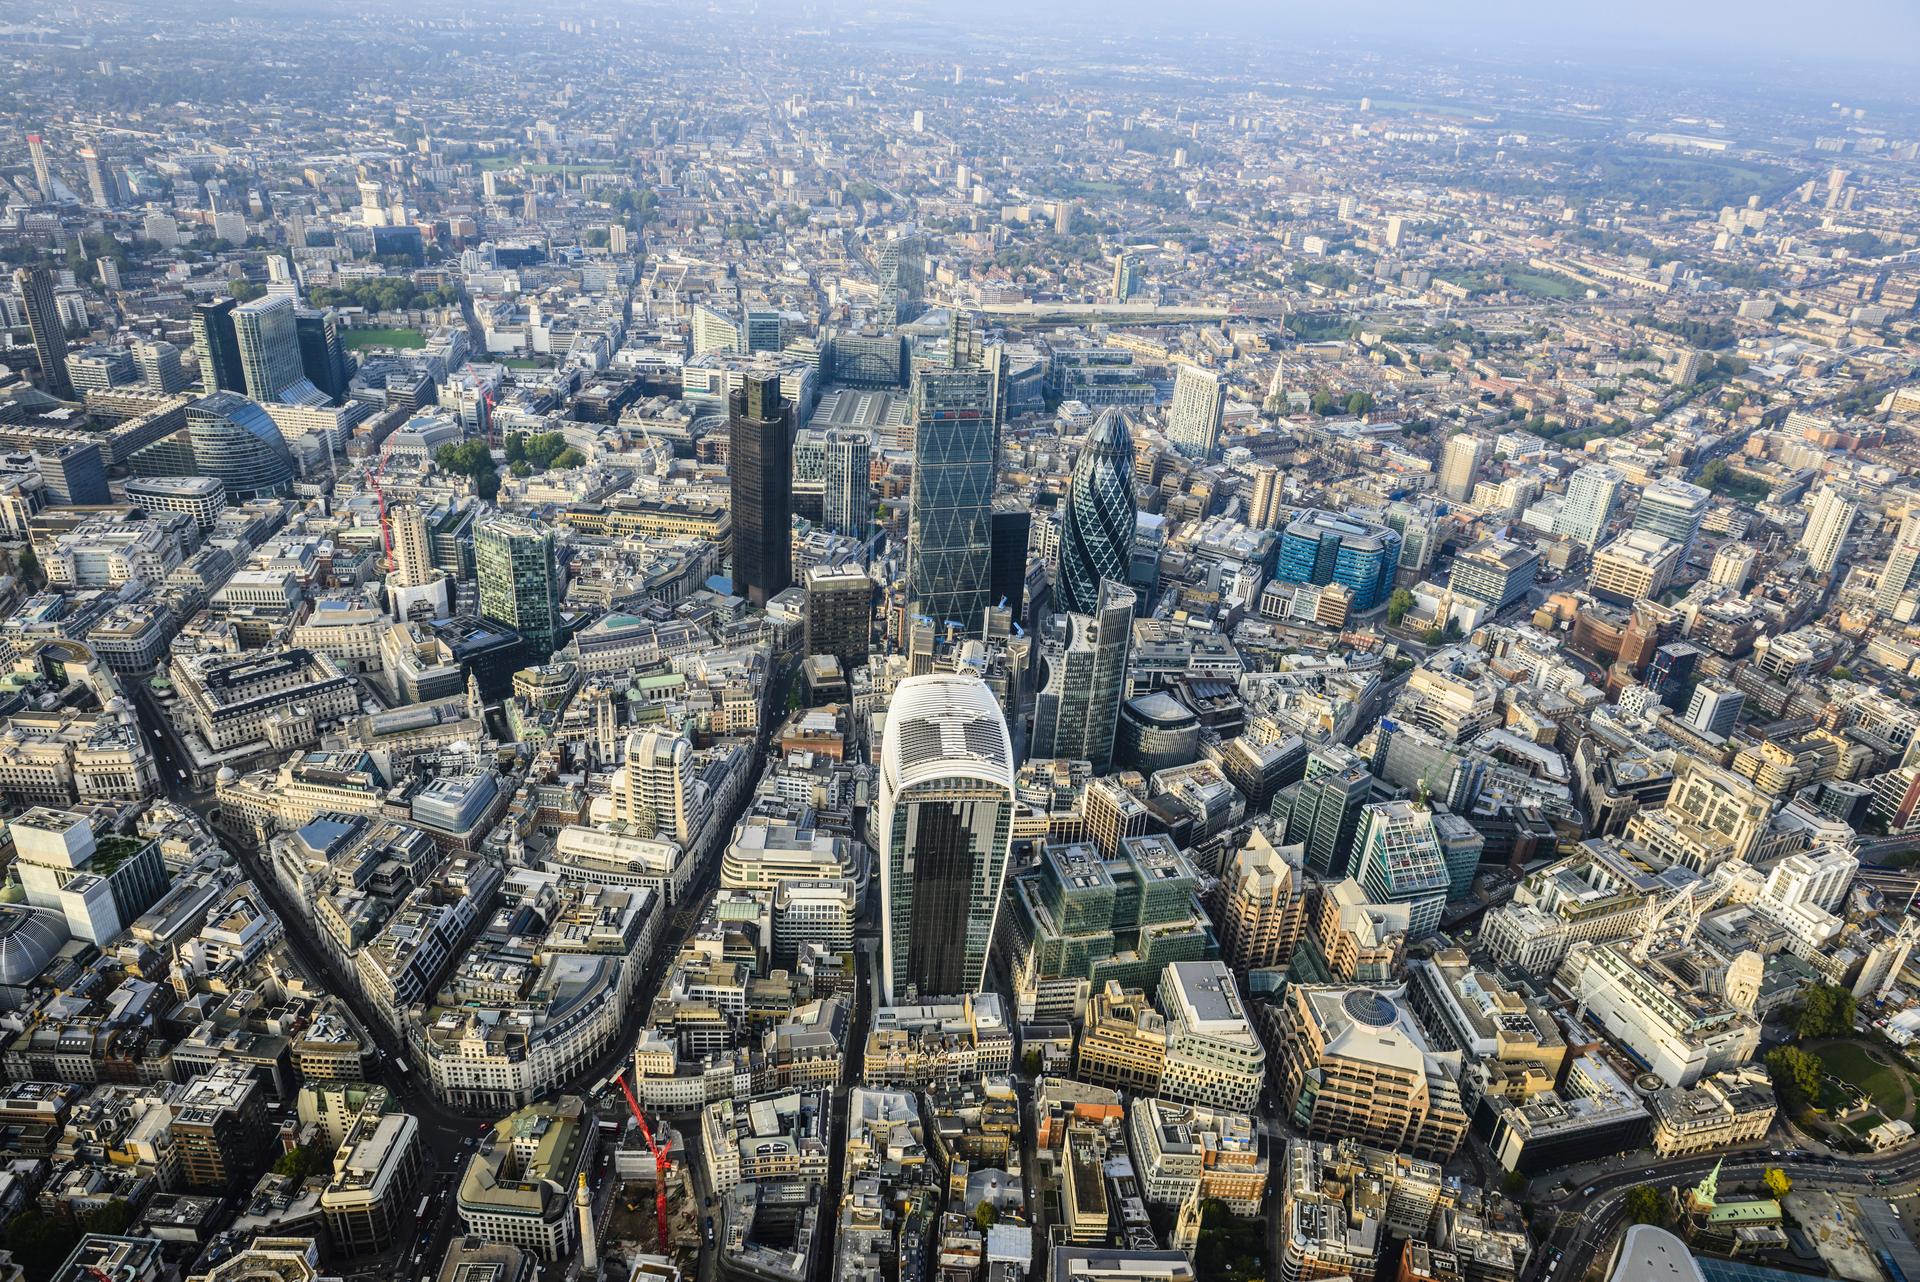 A picture of the city of London, where TwentyFour Asset Management LLP is located